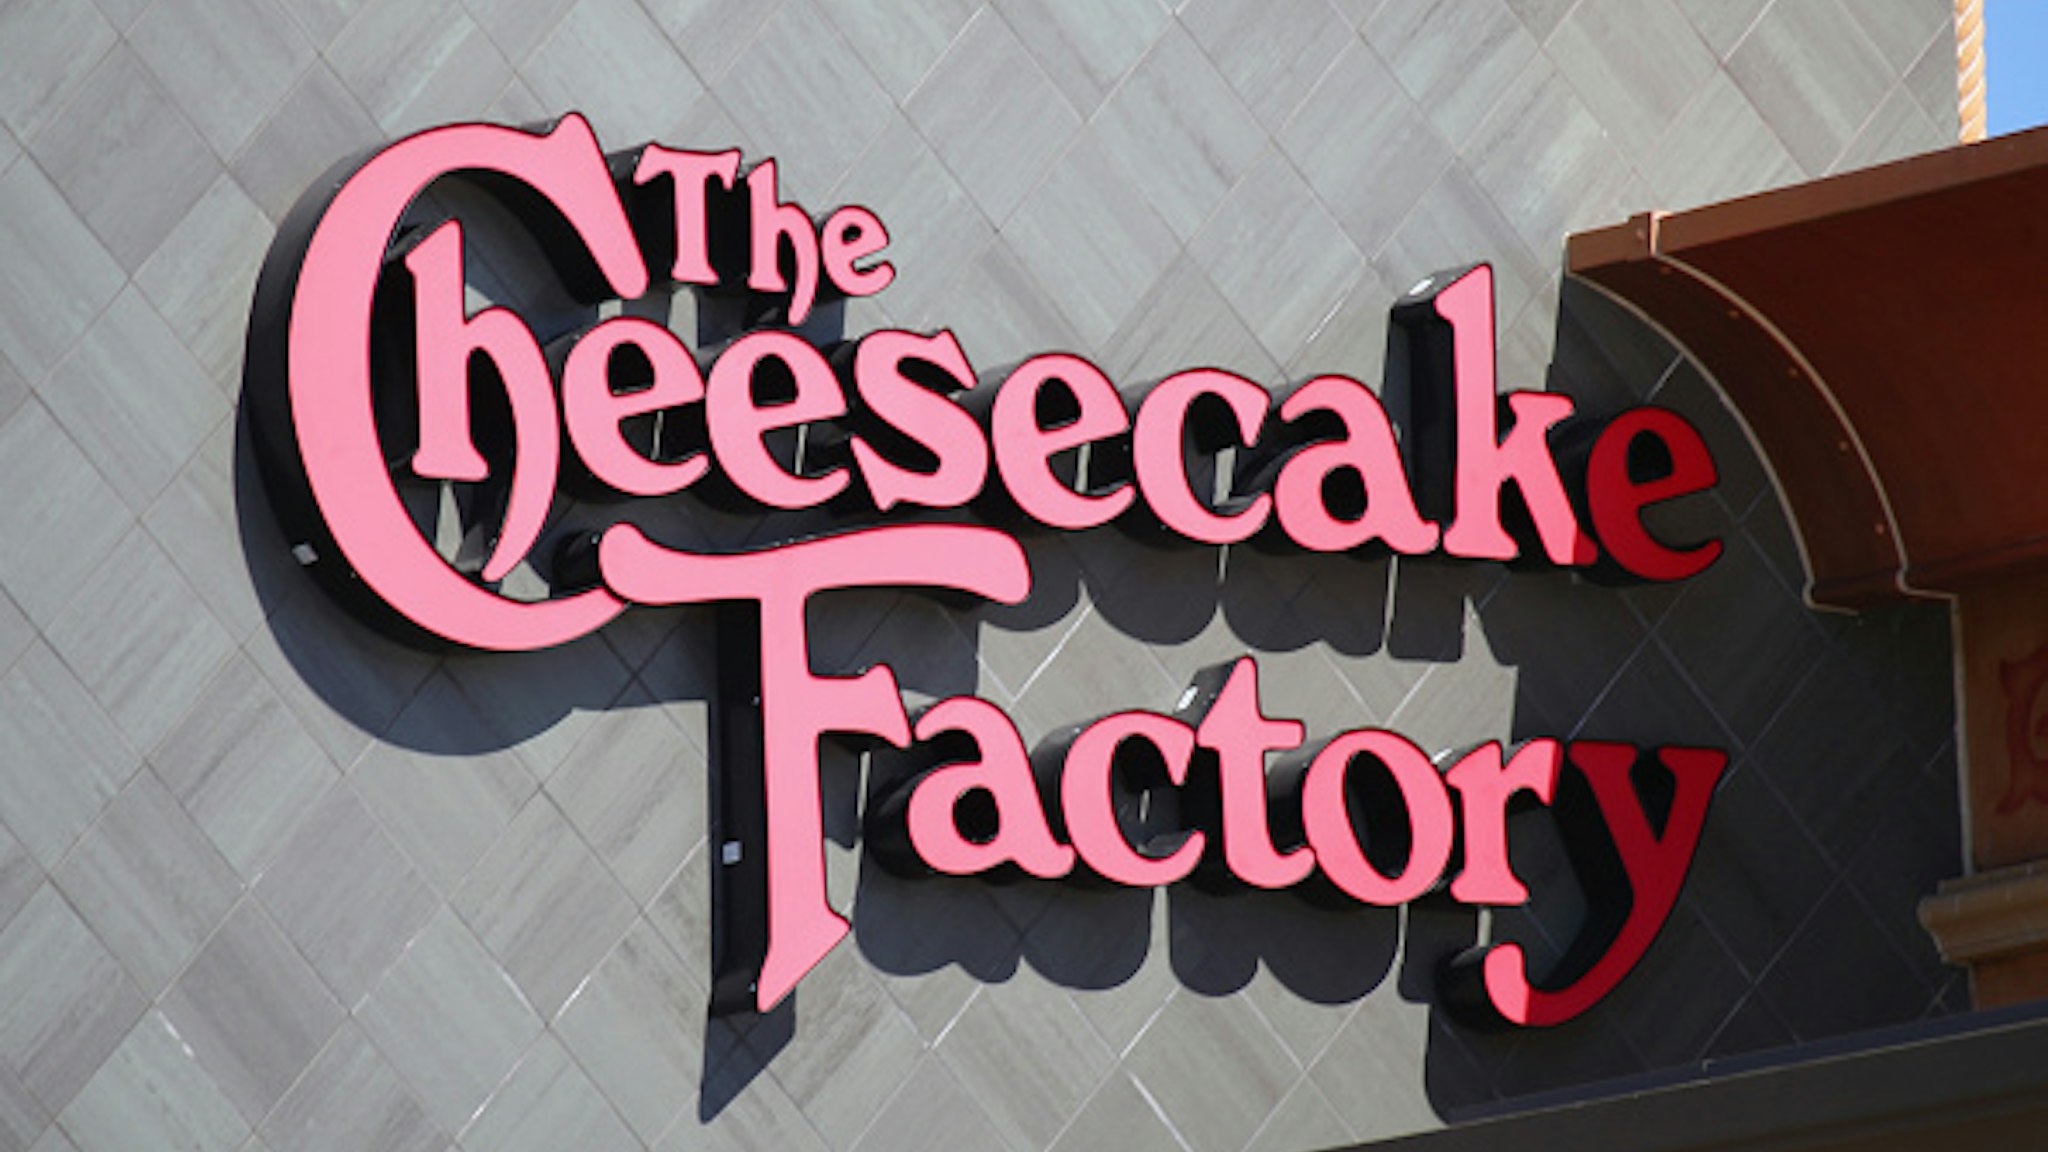 HUNTINGTON STATION, NEW YORK - MARCH 26: A general view of the Cheesecake Factory logo on their restaurant in the Walt Whitman Mall on March 26, 2020 in Huntington Station, New York. Across the country schools, businesses and places of work have either been shut down or are restricting hours of operation as health officials try to slow the spread of COVID-19.